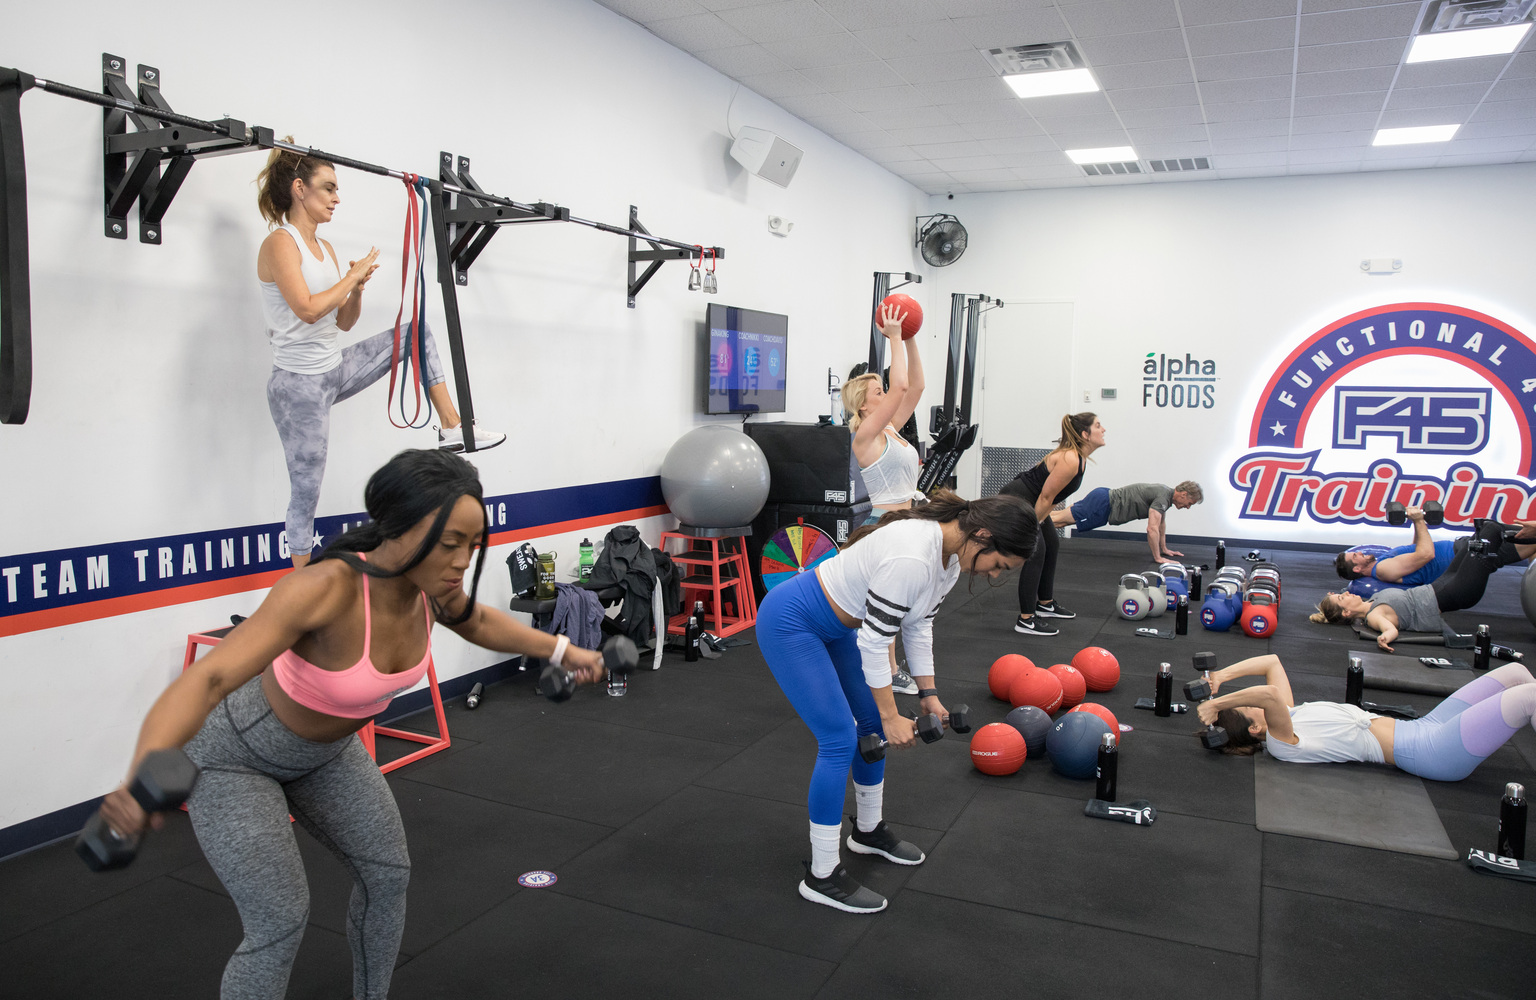 F45: Disruptive Boutique Fitness Industry, Needs Improvement